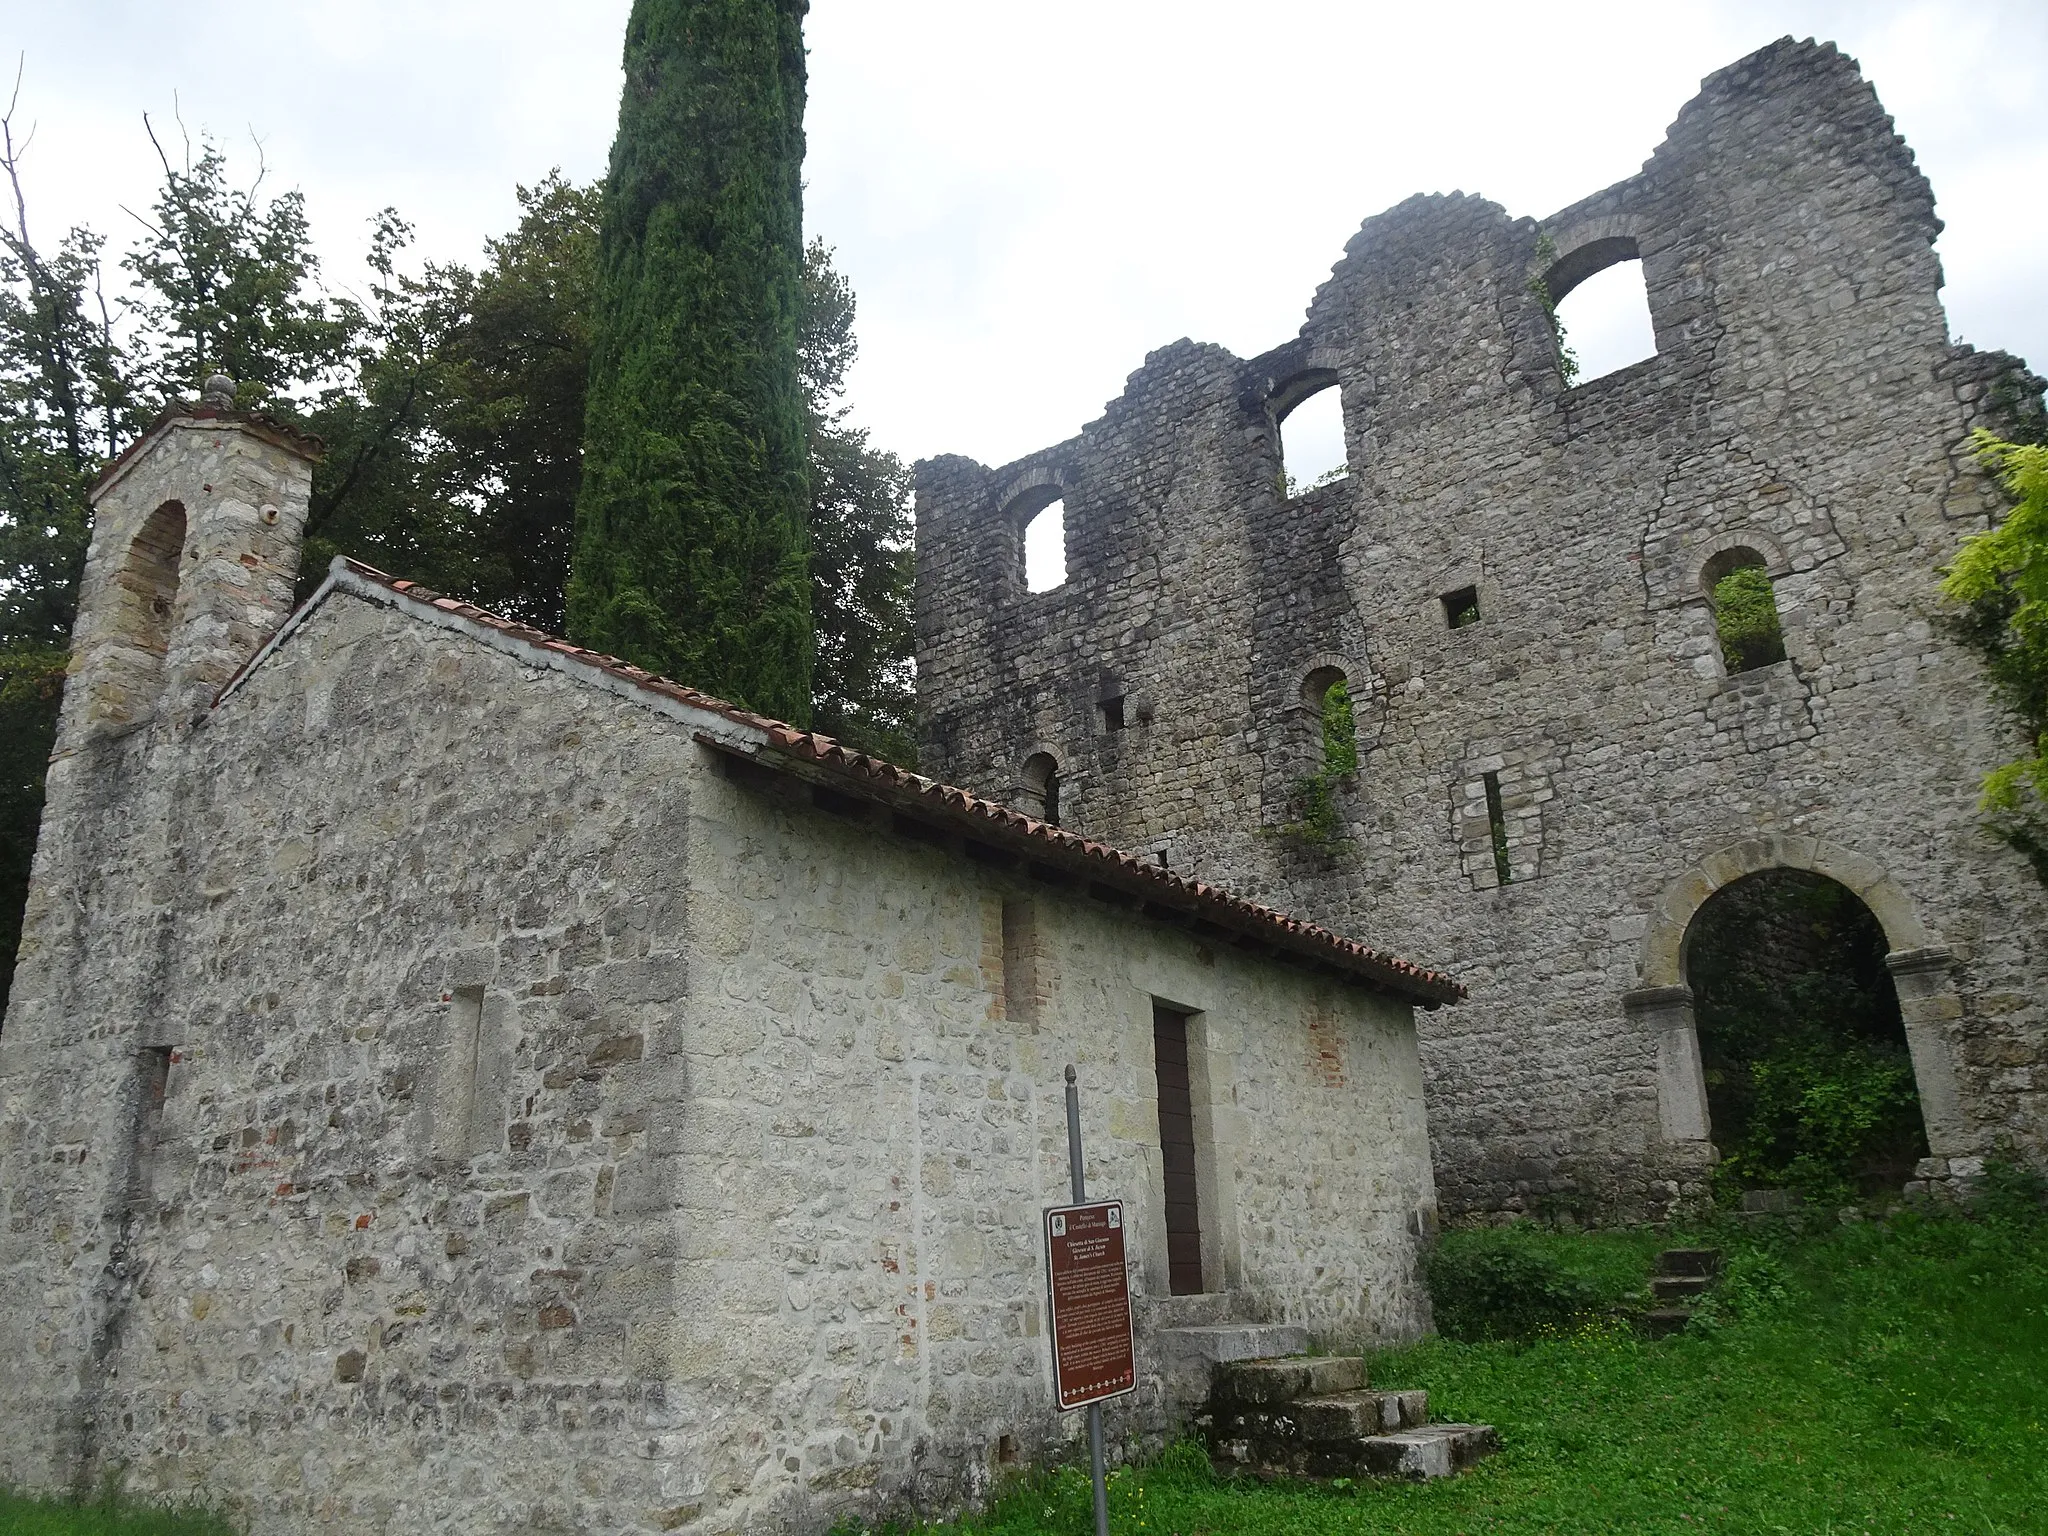 Photo showing: Attimis castle at Maniago, Italy